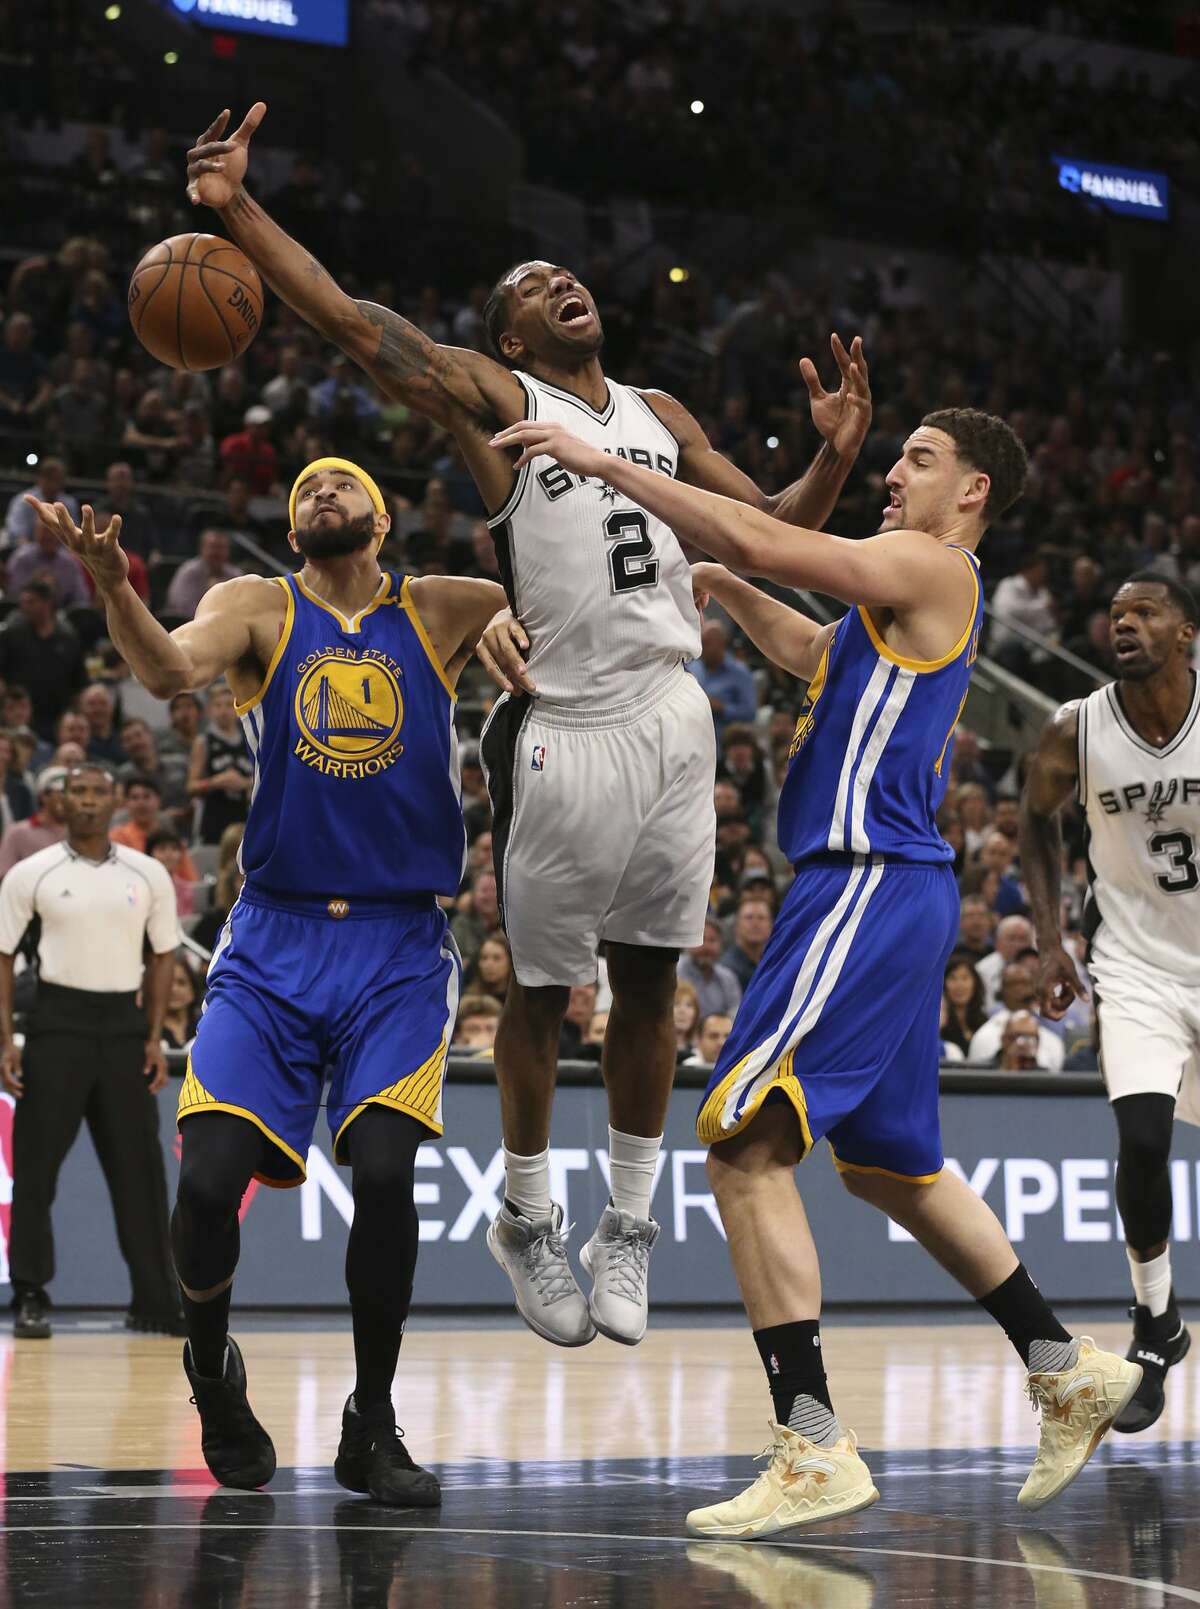 San Antonio Spurs?’ Kawhi Leonard gets fouled by Golden State Warriors' Klay Thompson, right, as JaVale McGee assists during the first half at the AT&T Center, Wednesday, March 29, 2017.